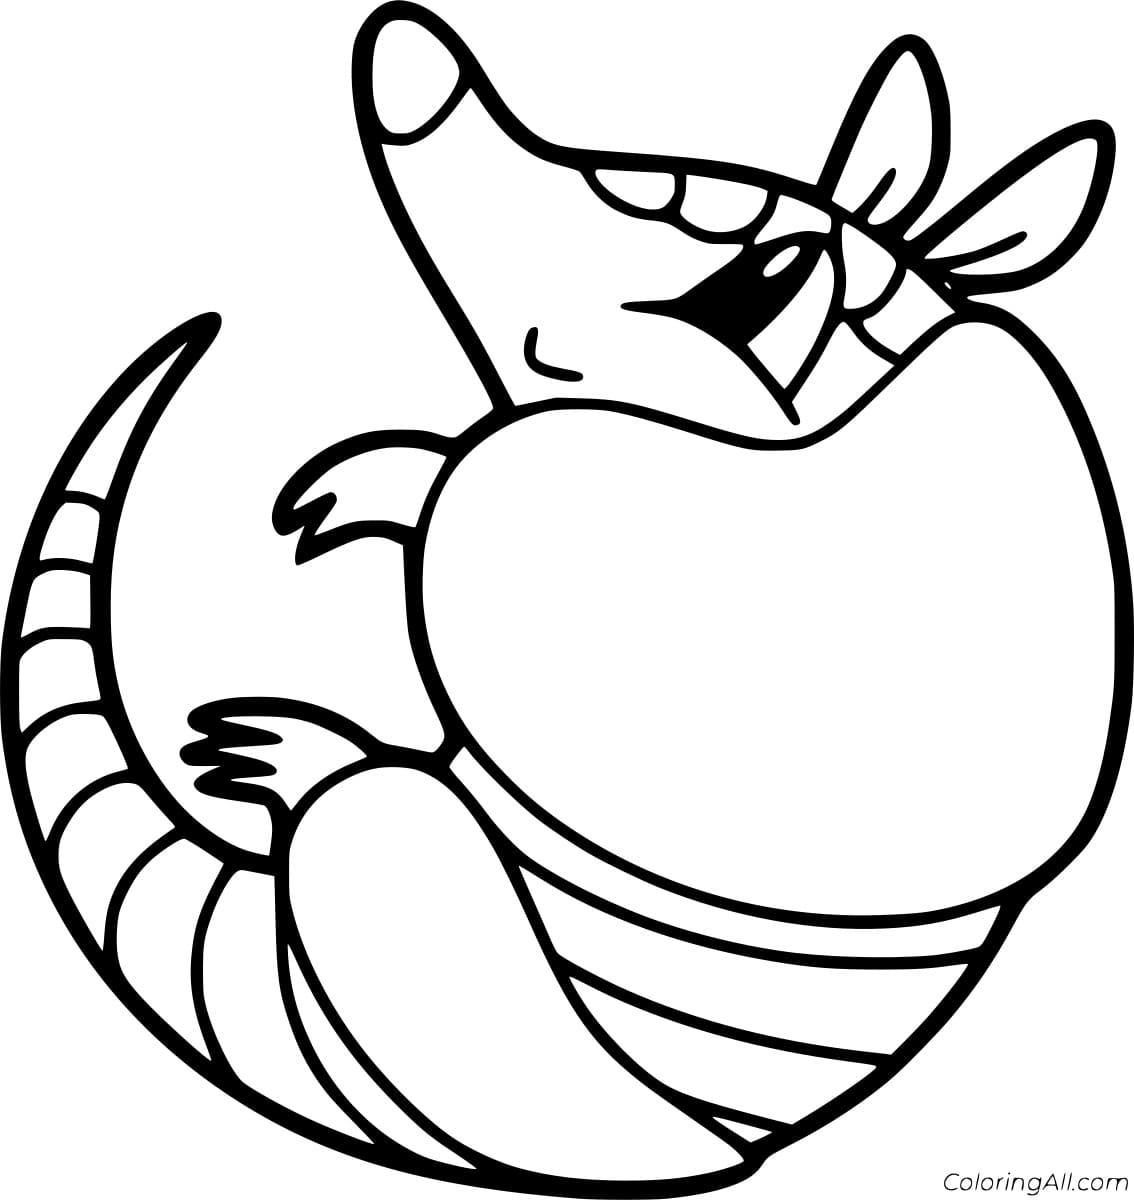 Cute Armadillo To Print Coloring Page